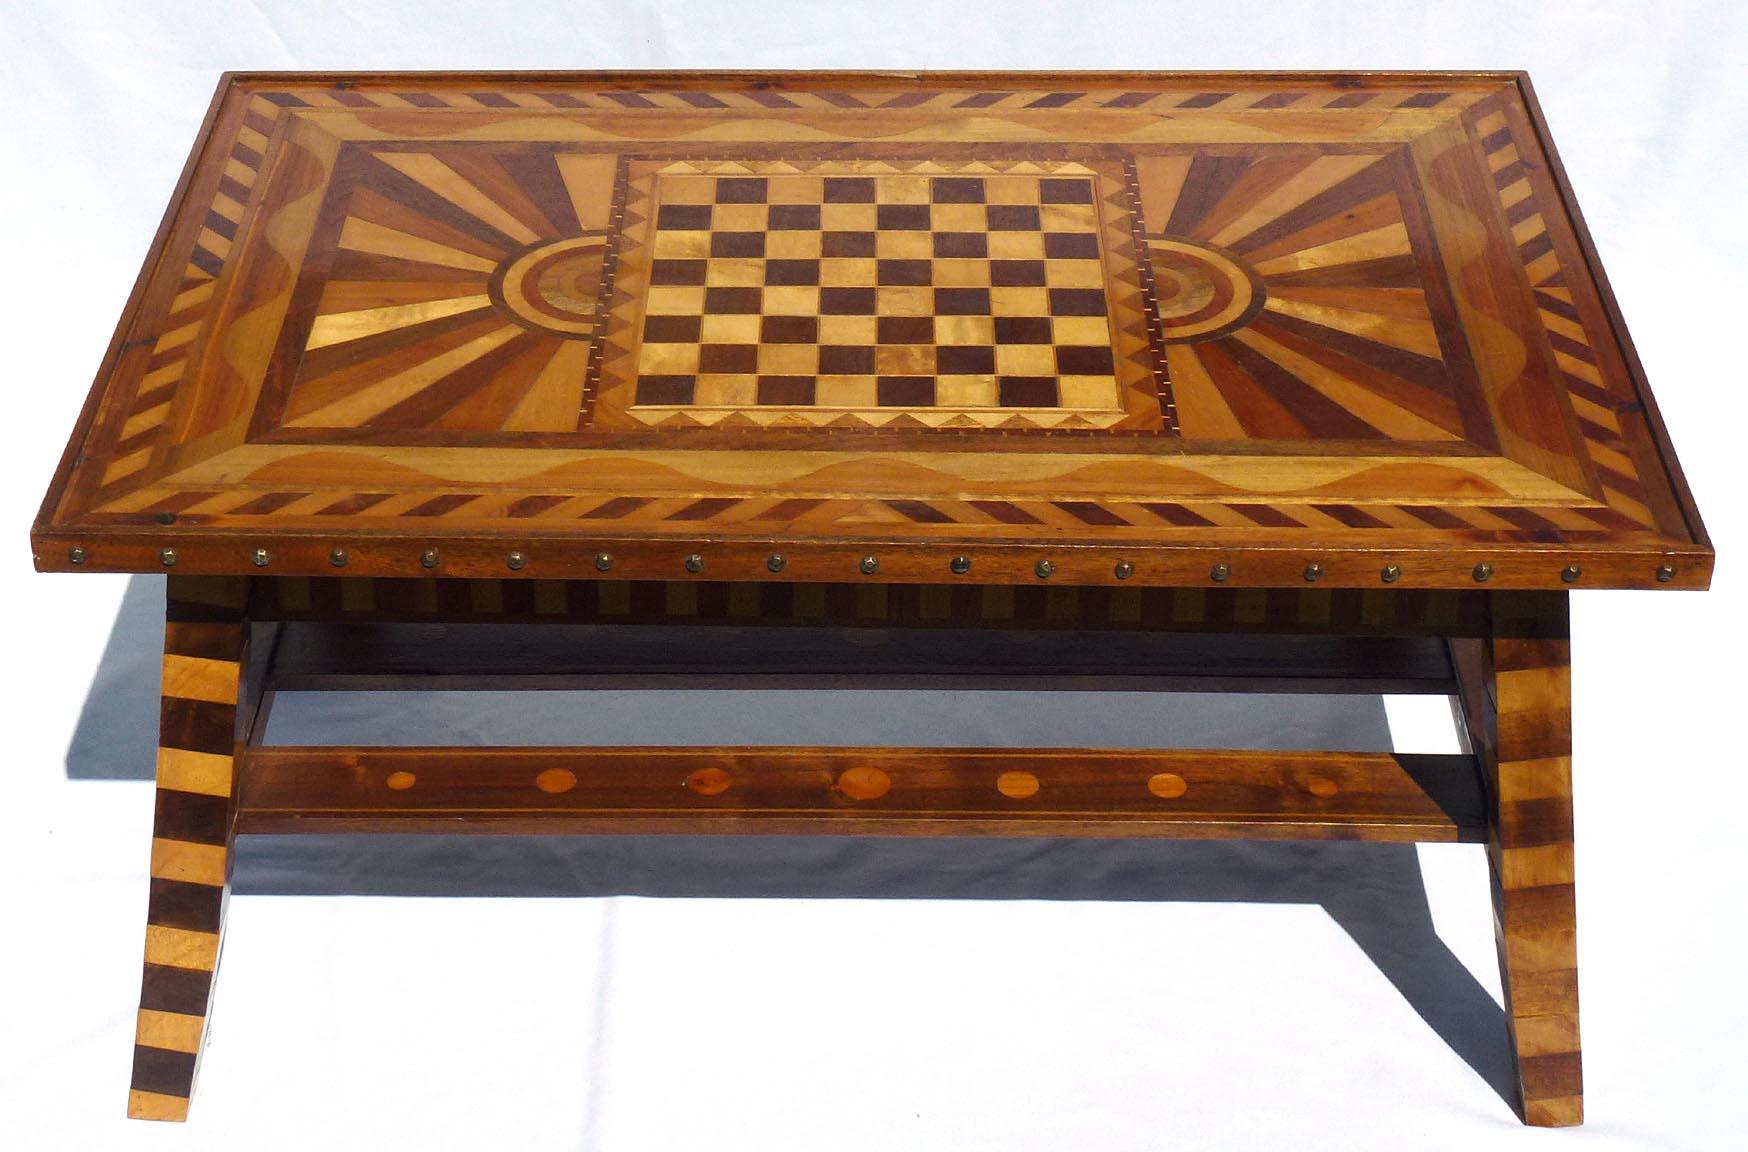 This is an outstanding marquetry game table. The design and workmanship are beautiful. The top has a checkerboard in the center, with a pieced double border. This is flanked by two sunbursts, a wave pattern, and then a triple border. The sides,